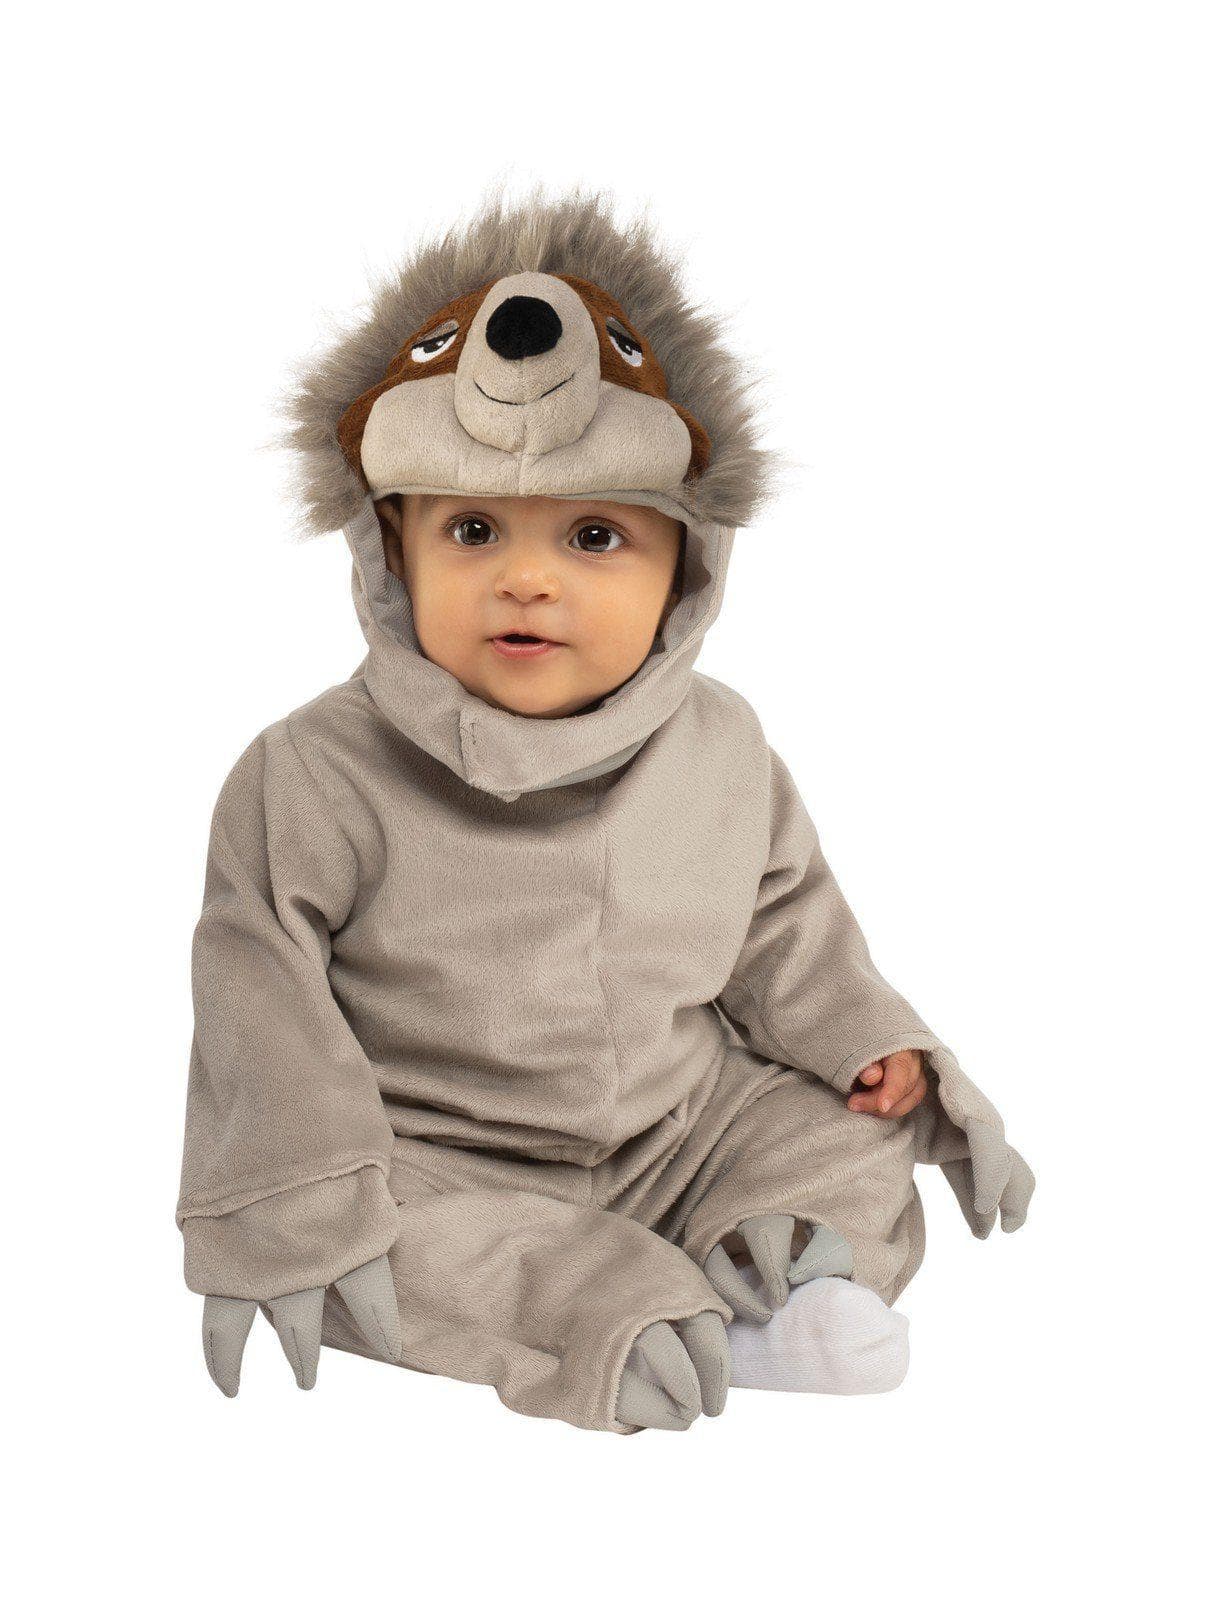 Baby/Toddler Sloth Costume - costumes.com